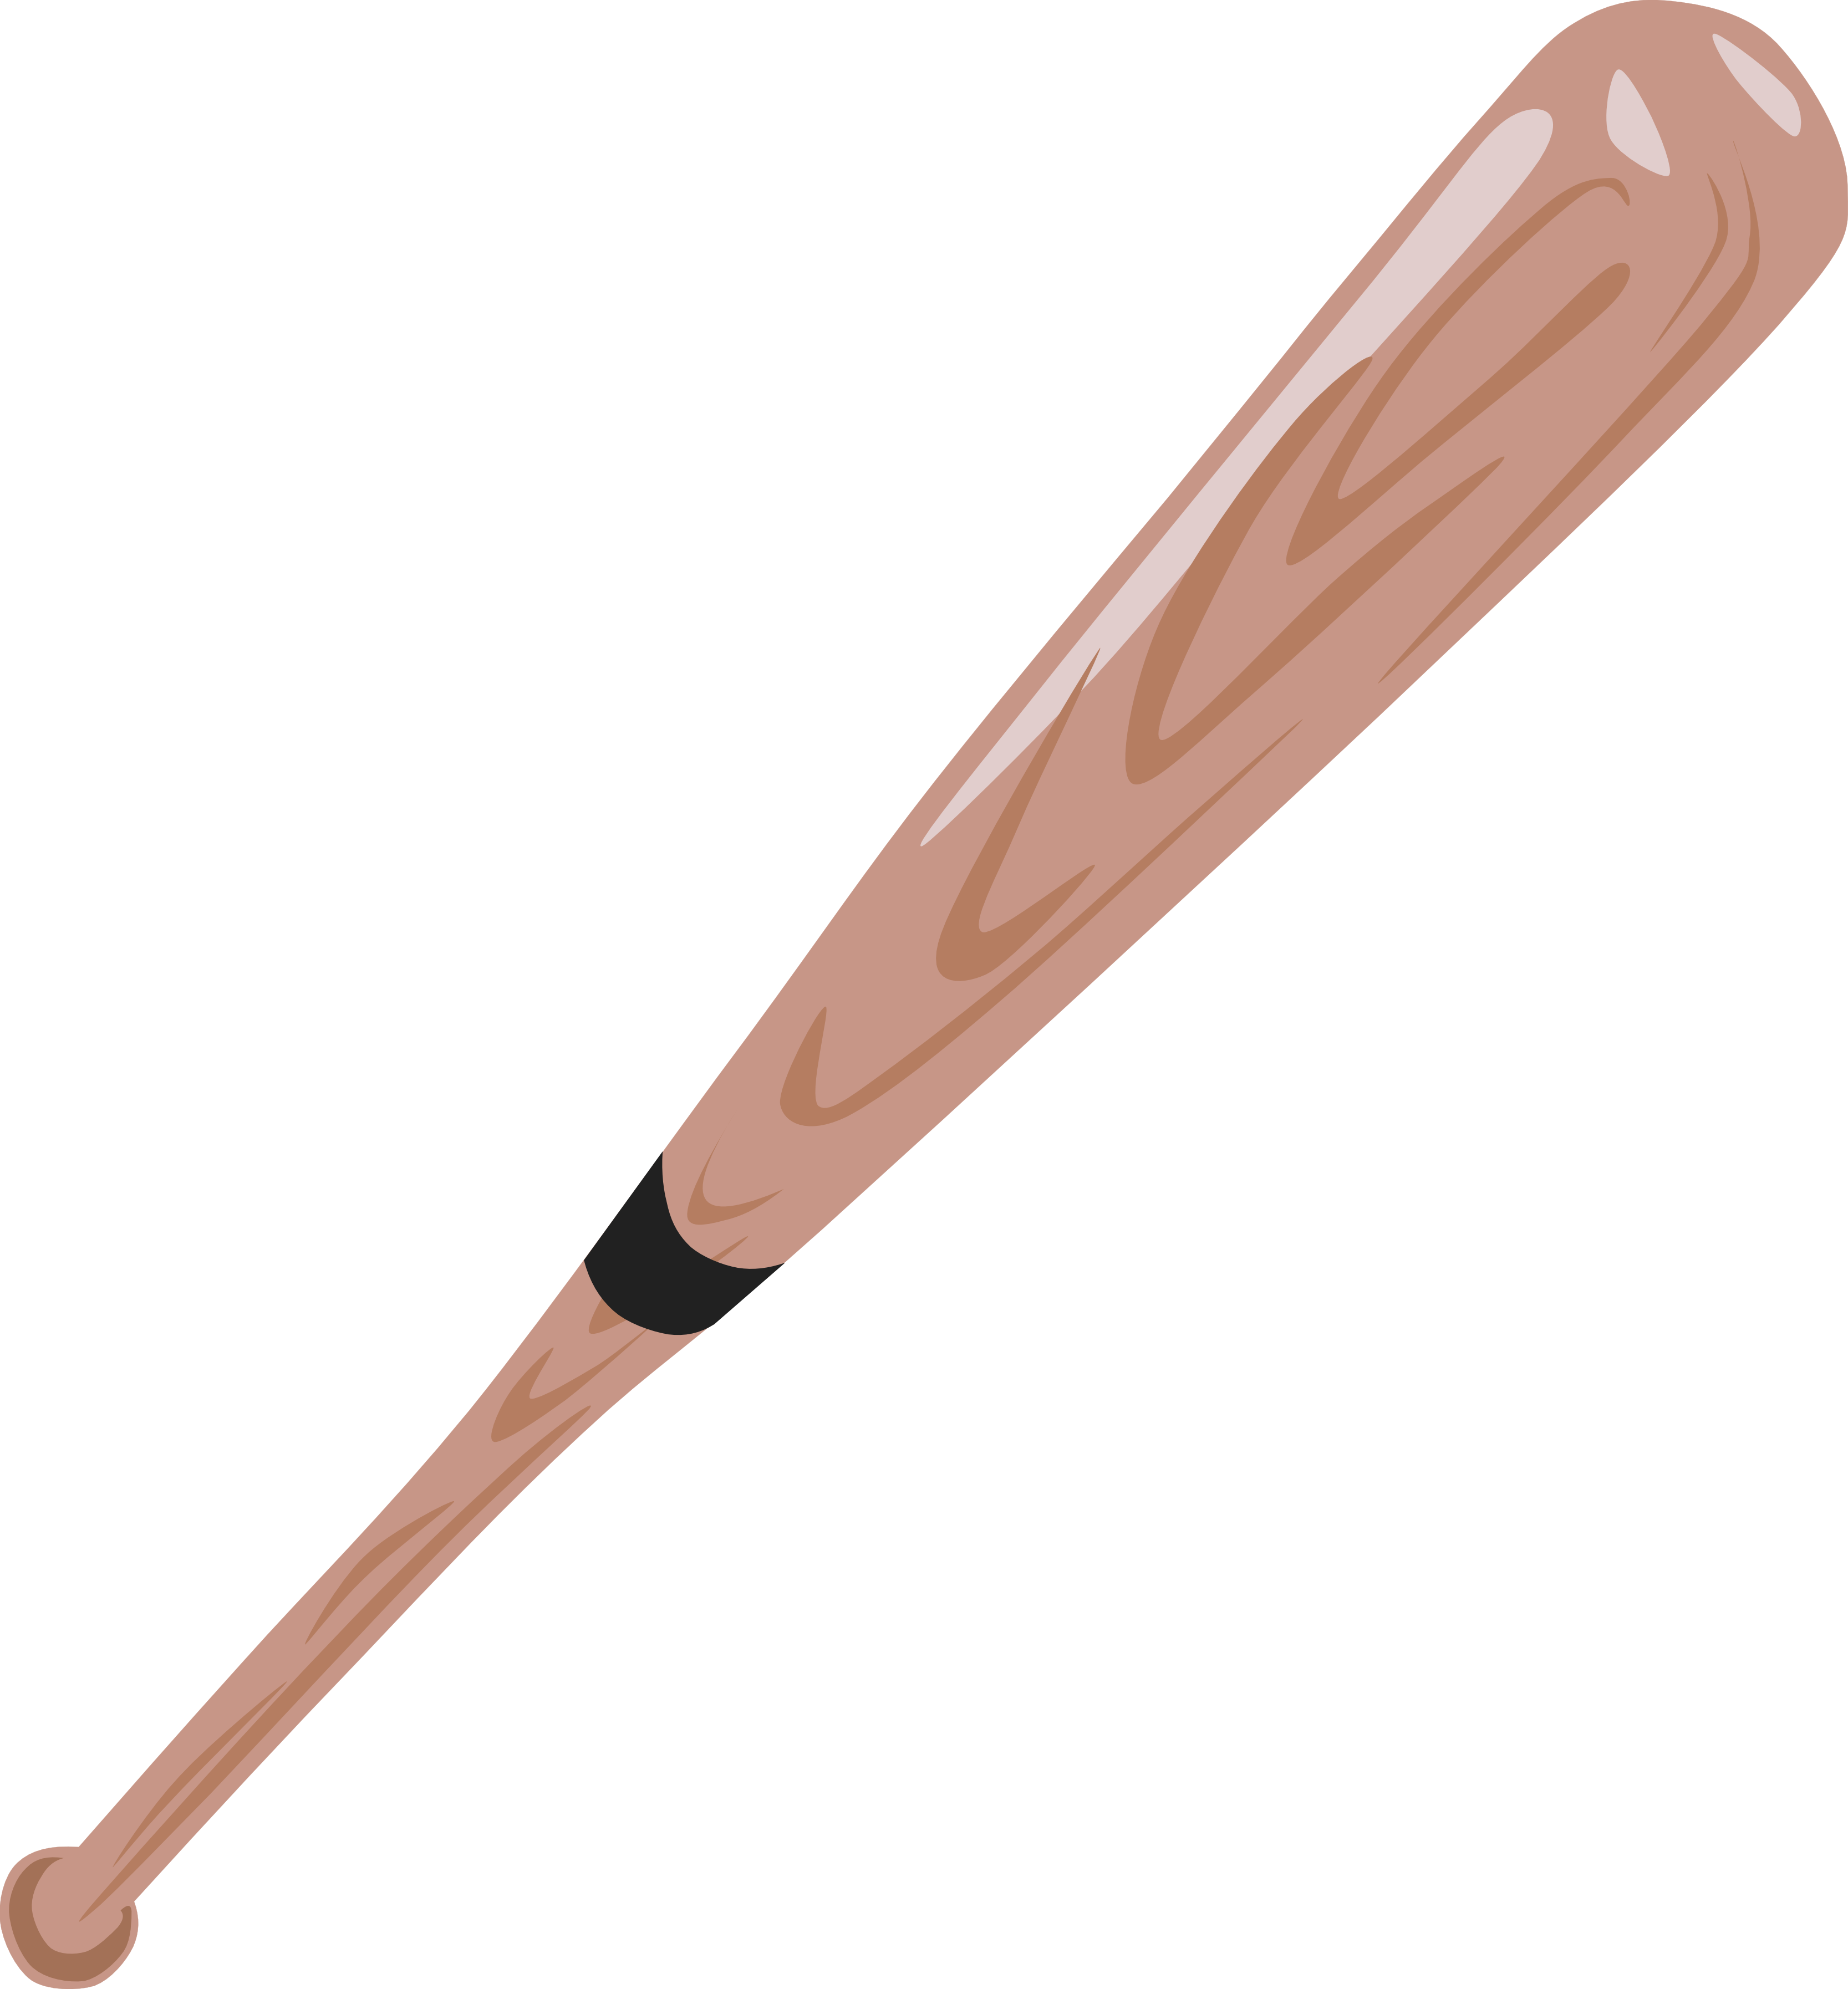 High quality Baseball Bat Cliparts For Free!